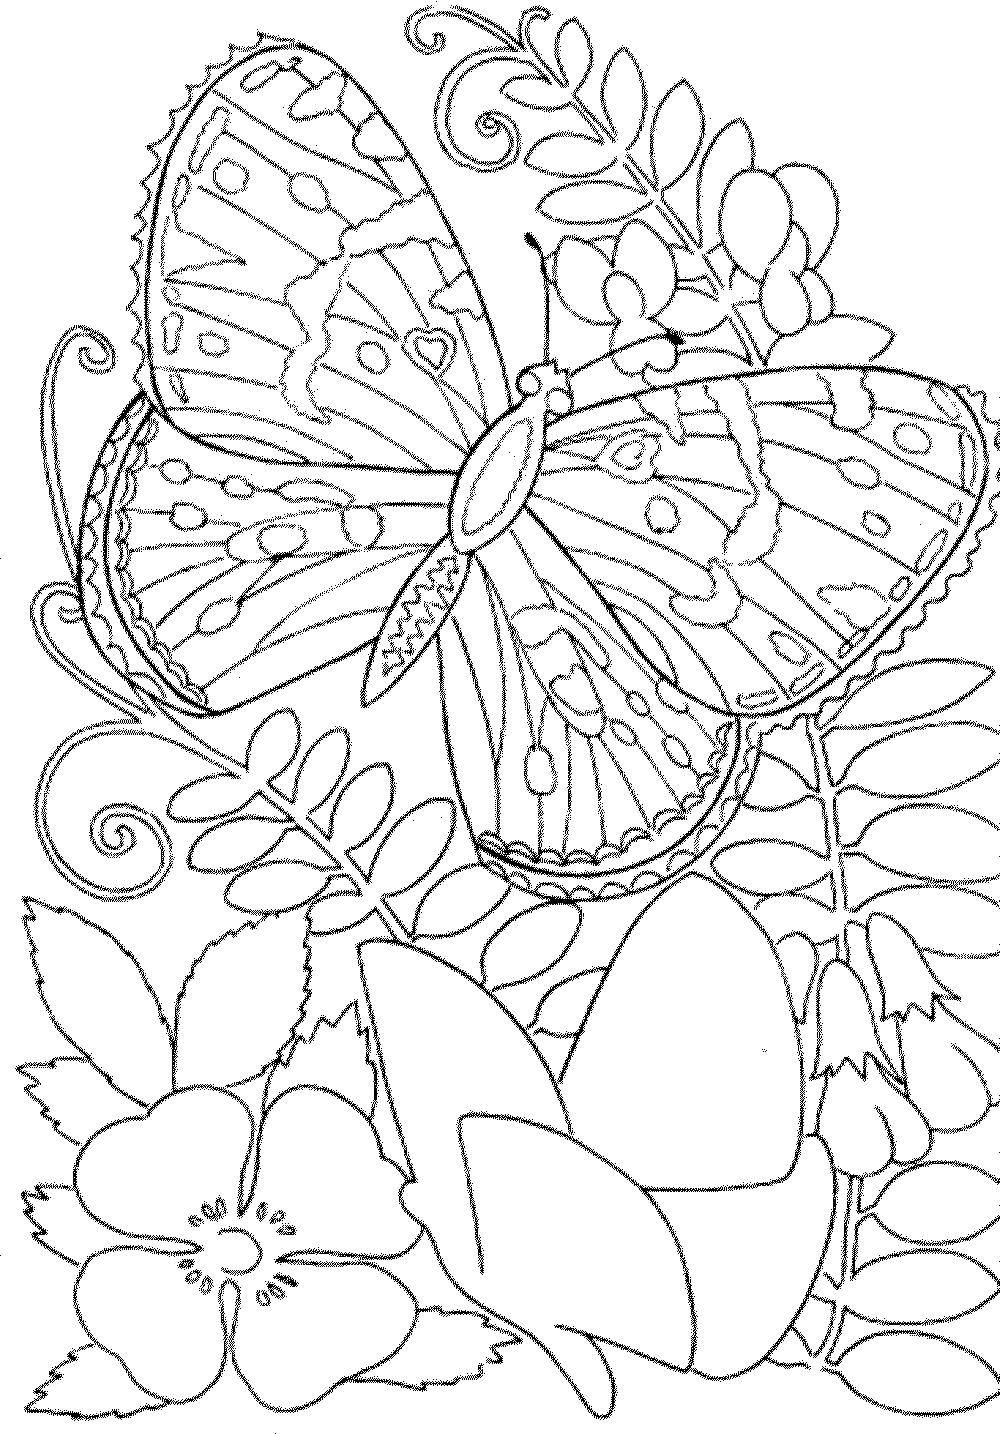 Coloring Butterfly in flowers. Category butterfly. Tags:  Butterfly, flowers.